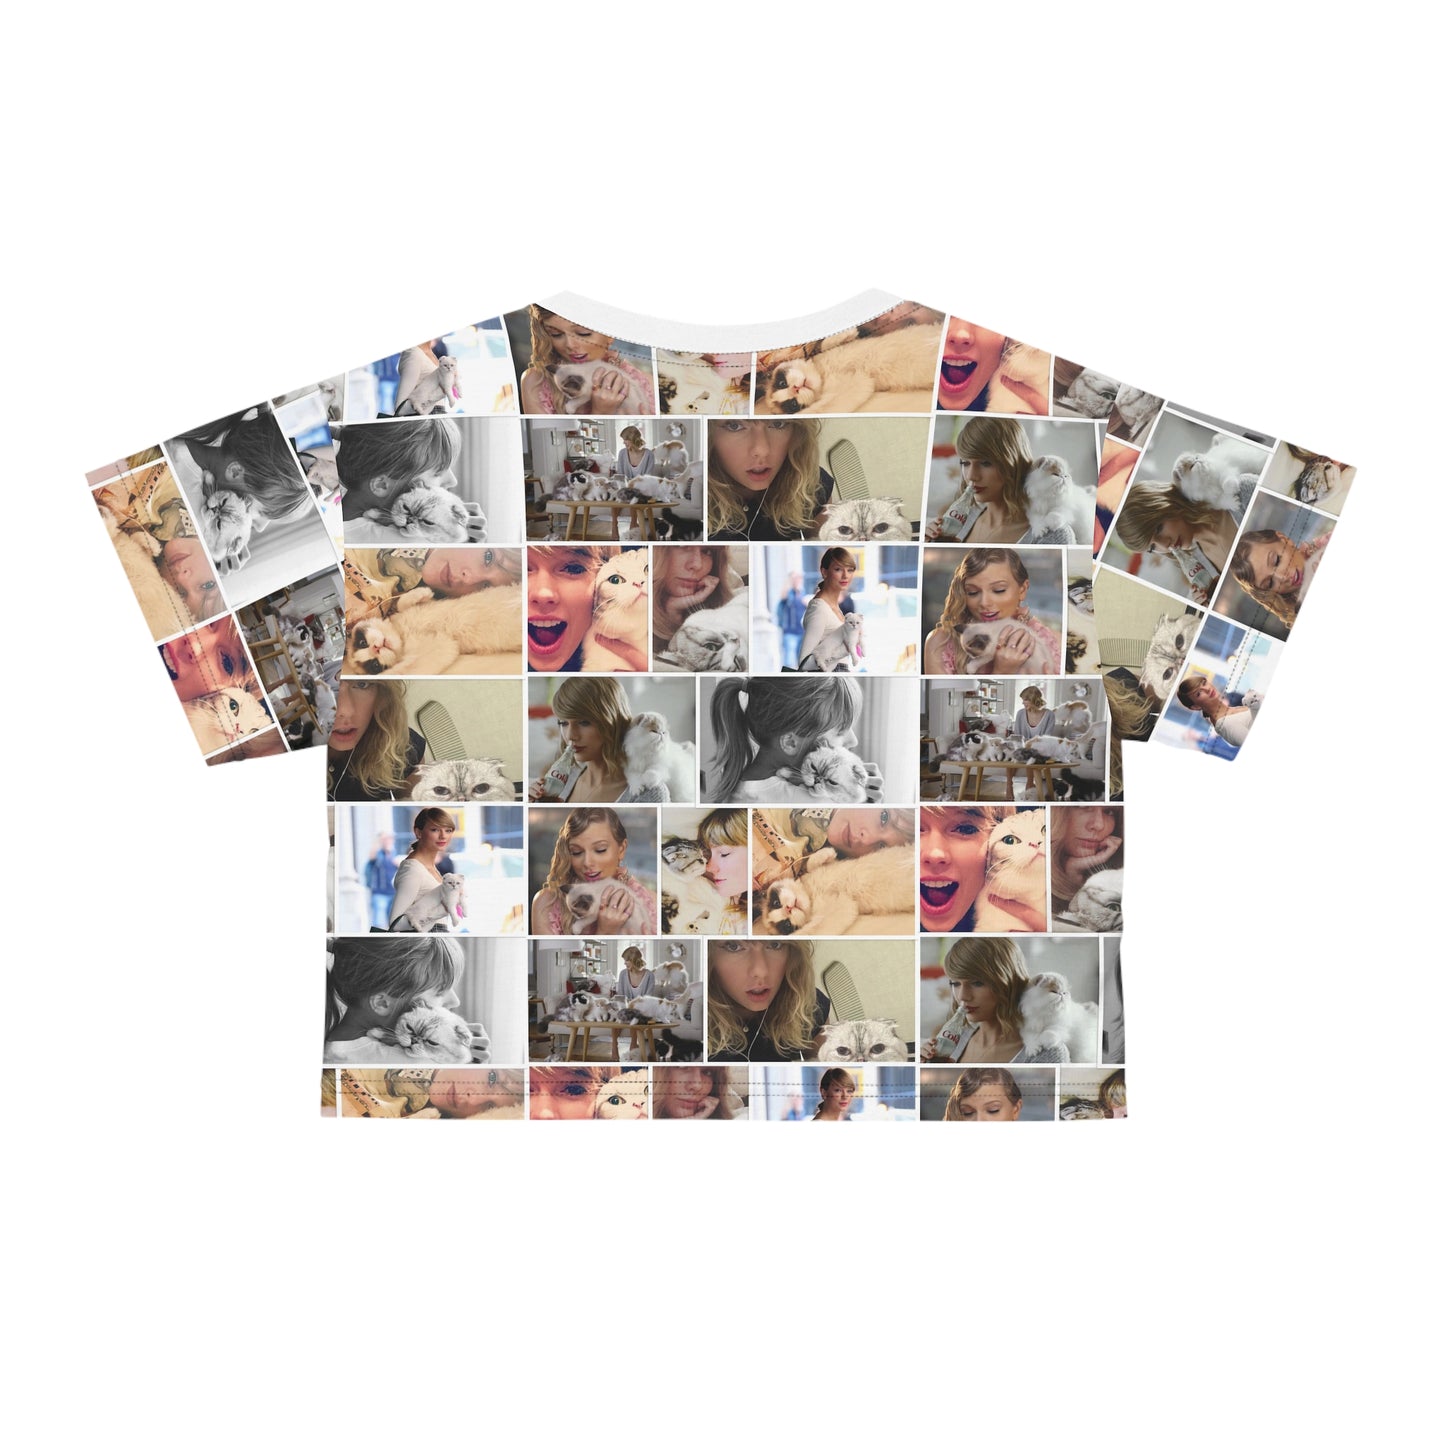 Taylor Swift's Cats Collage Pattern Crop Tee